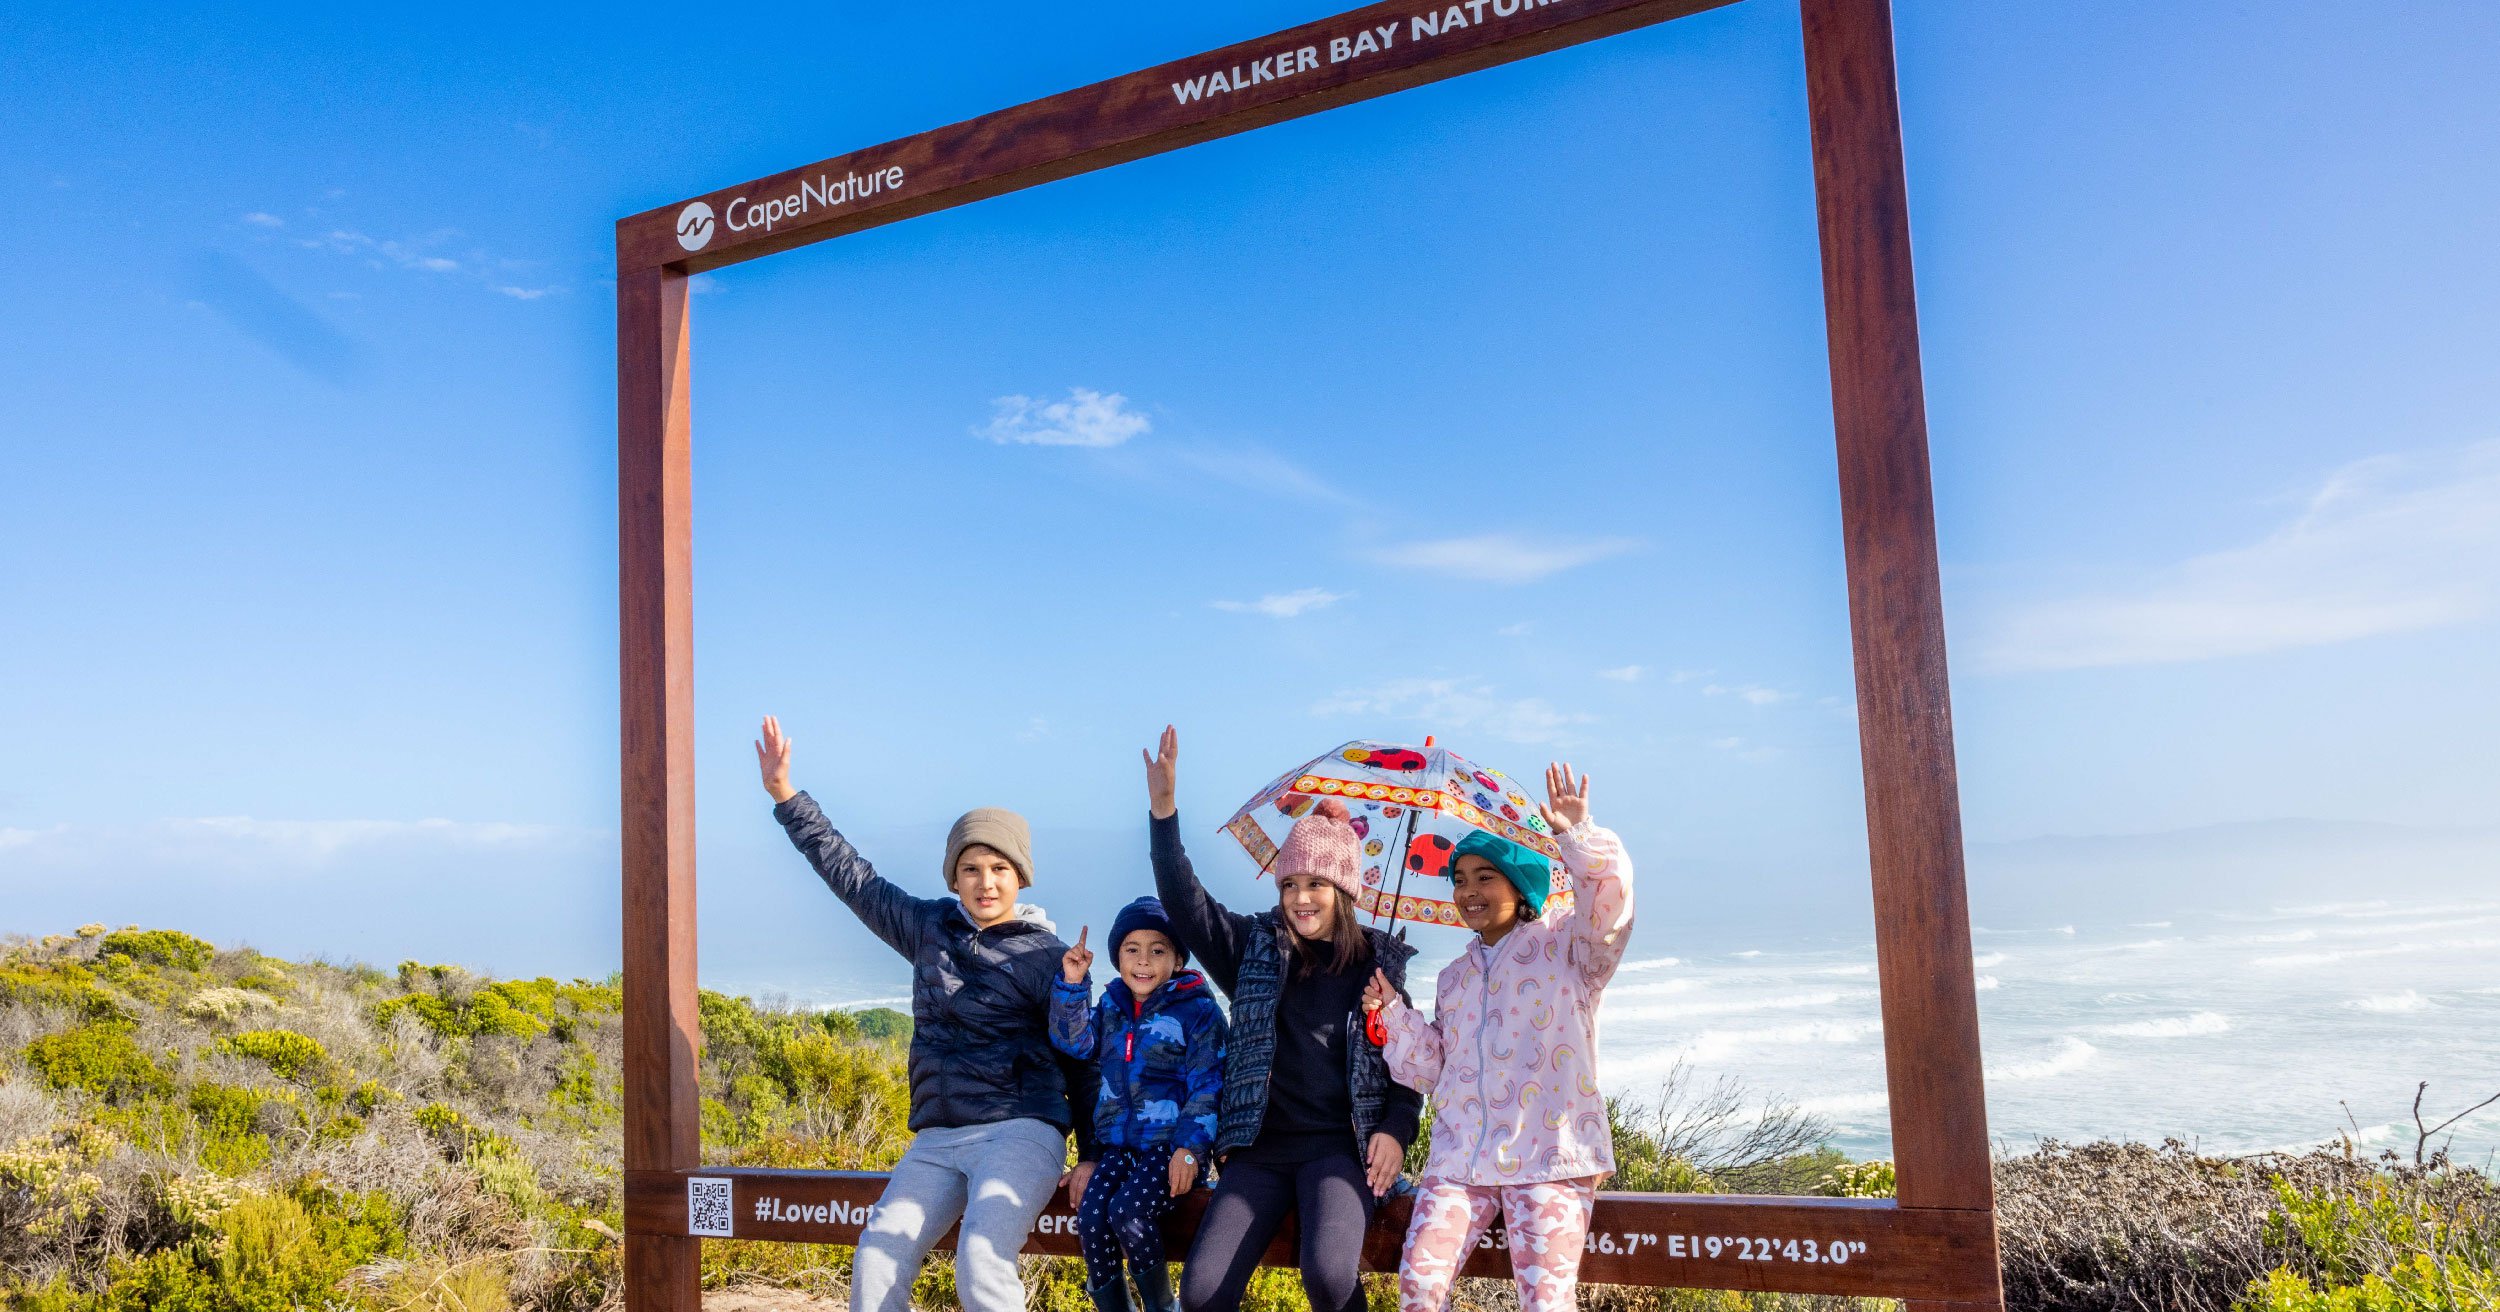 A must do family activity: Explore CapeNature’s new outdoors photo-frames